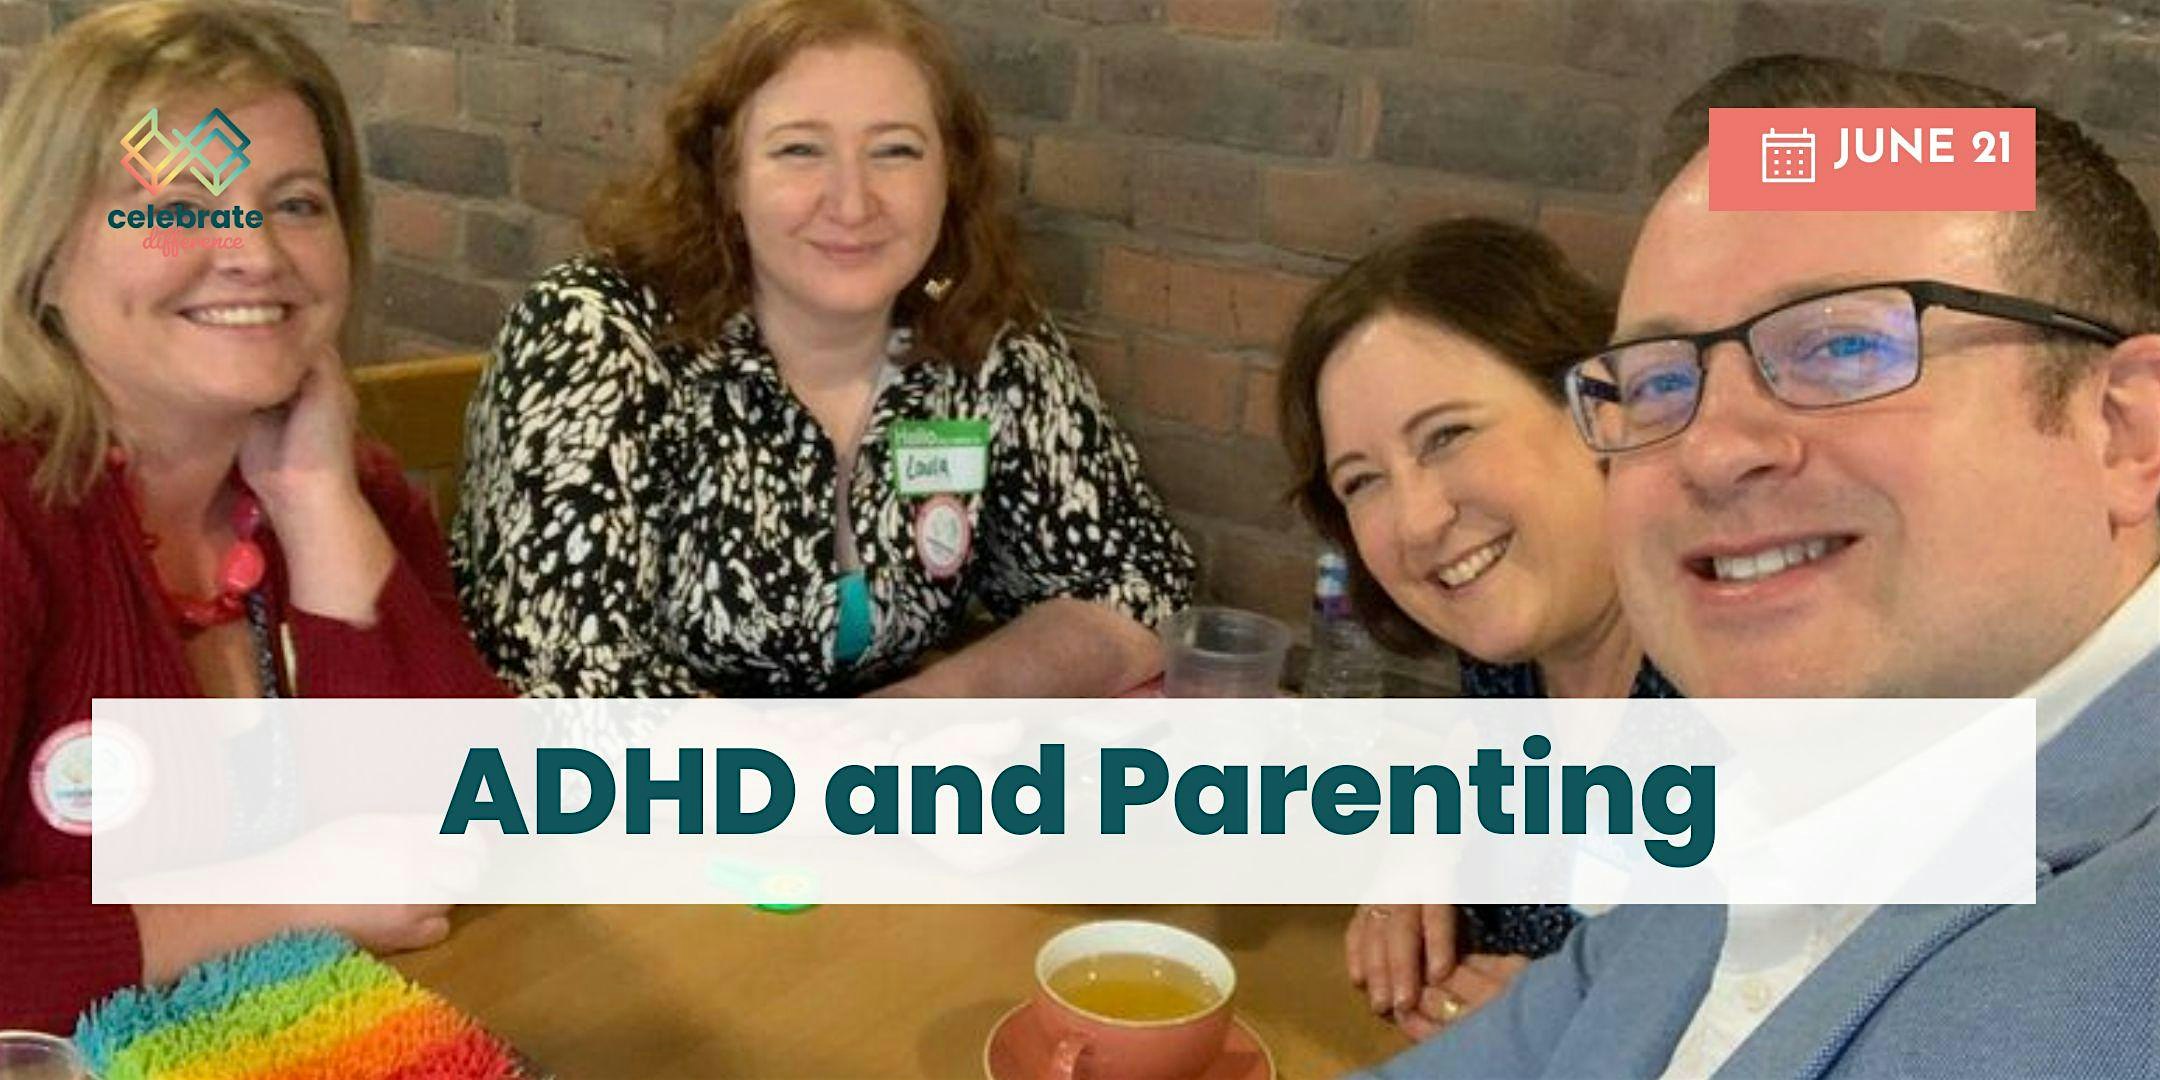 ADHD and parenting